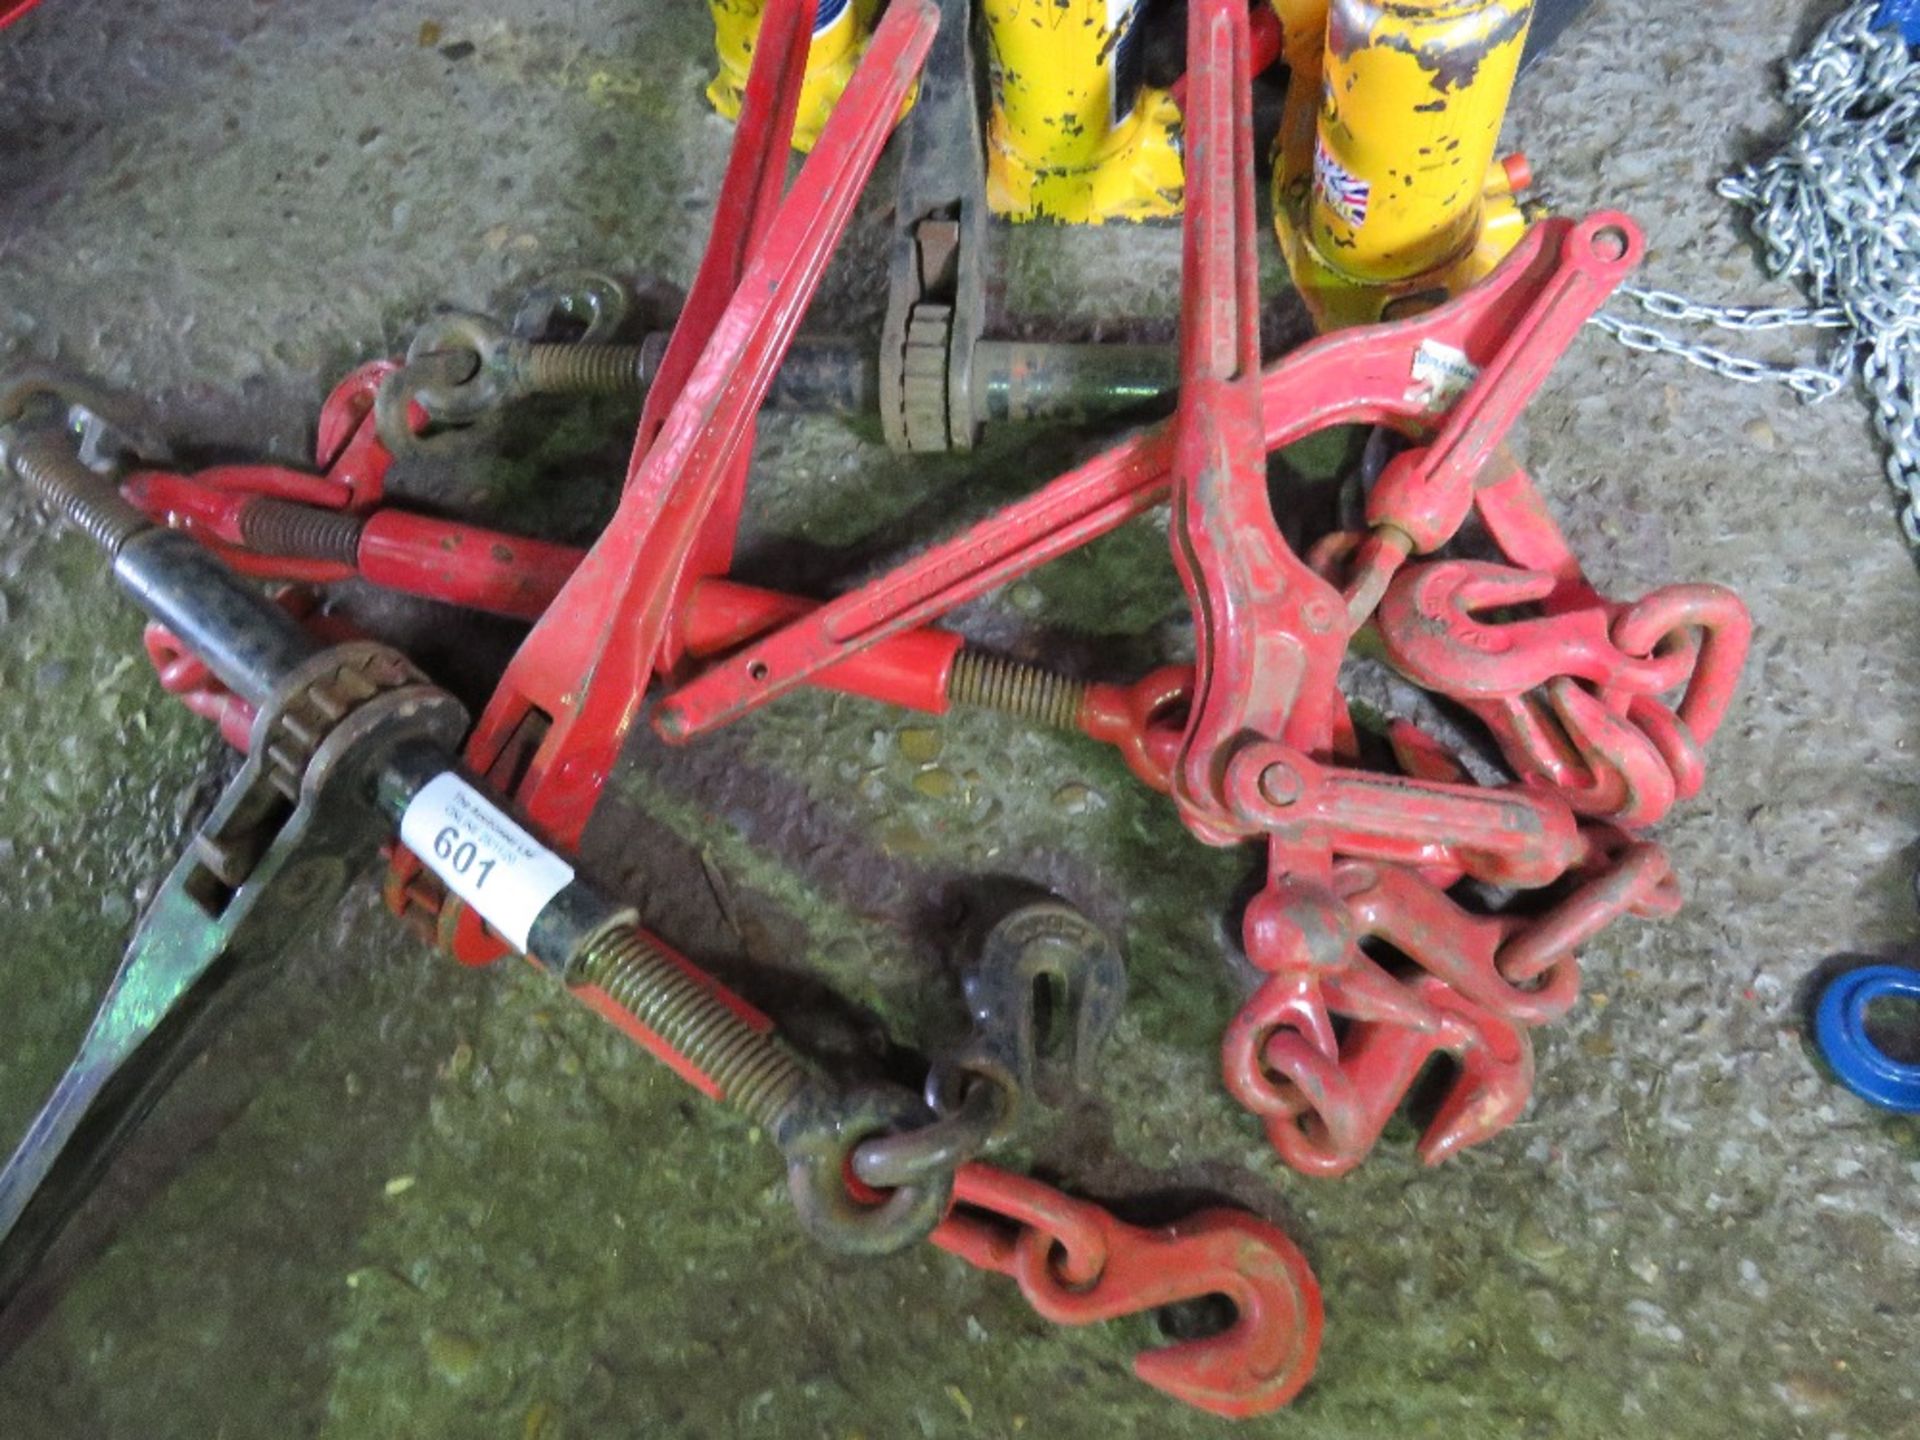 6 X LOAD TENSIONERS. 4 X RATCHETS AND 2 X DOGS, SOURCED FROM DEPOT CLEARANCE DUE TO A CHANGE IN COMP - Image 2 of 2